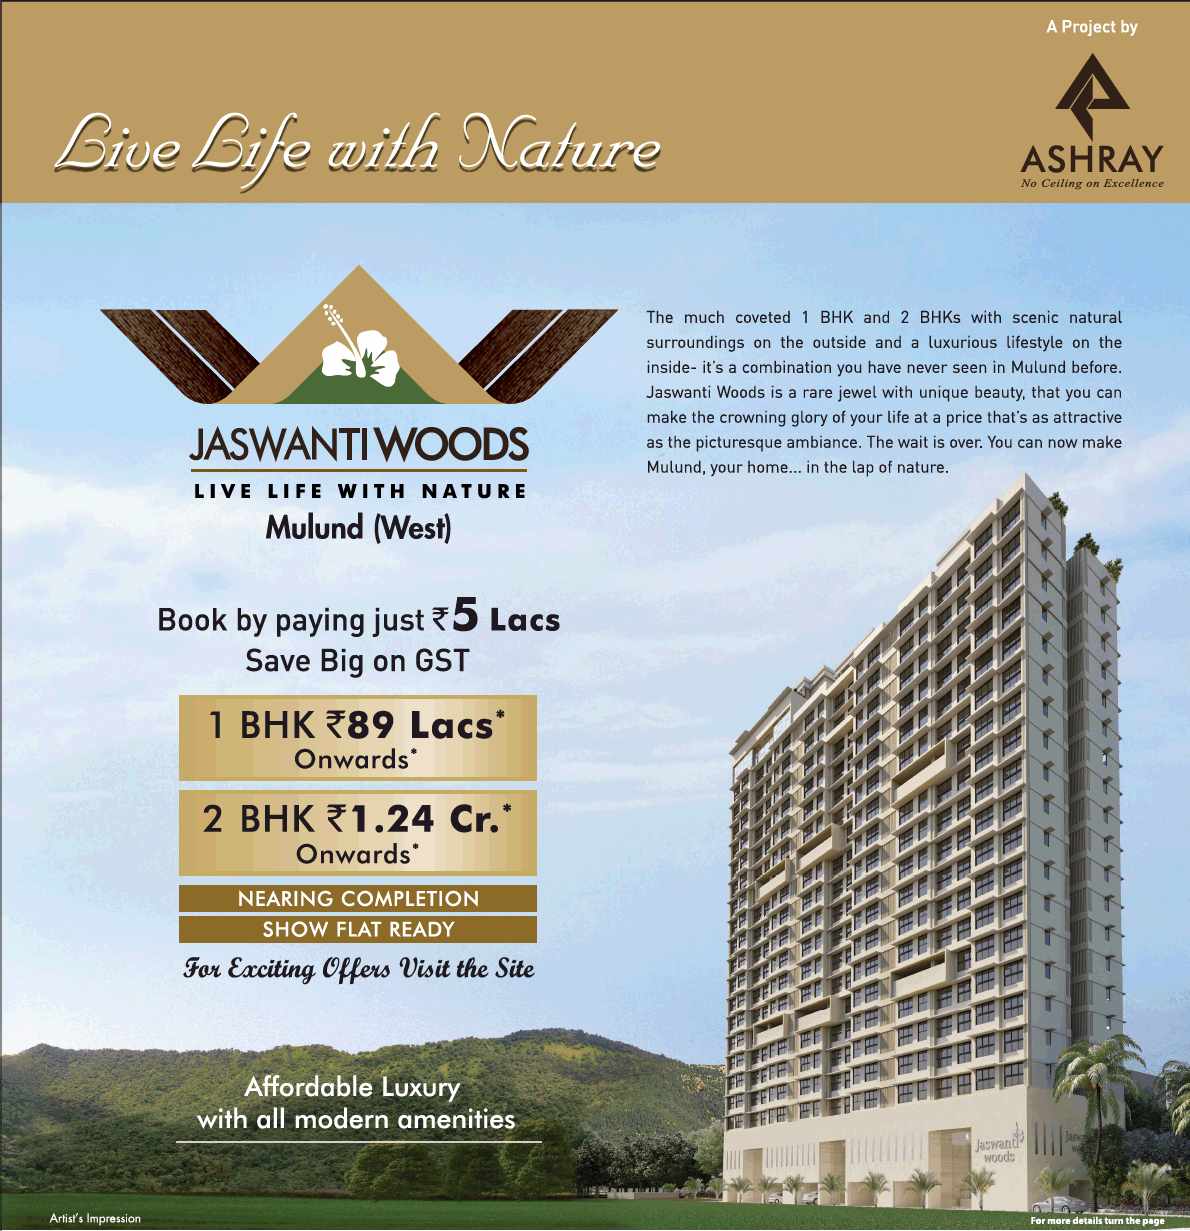 Book home by paying just Rs. 5 Lacs at Ashray Jaswanti Woods in Mumbai Update